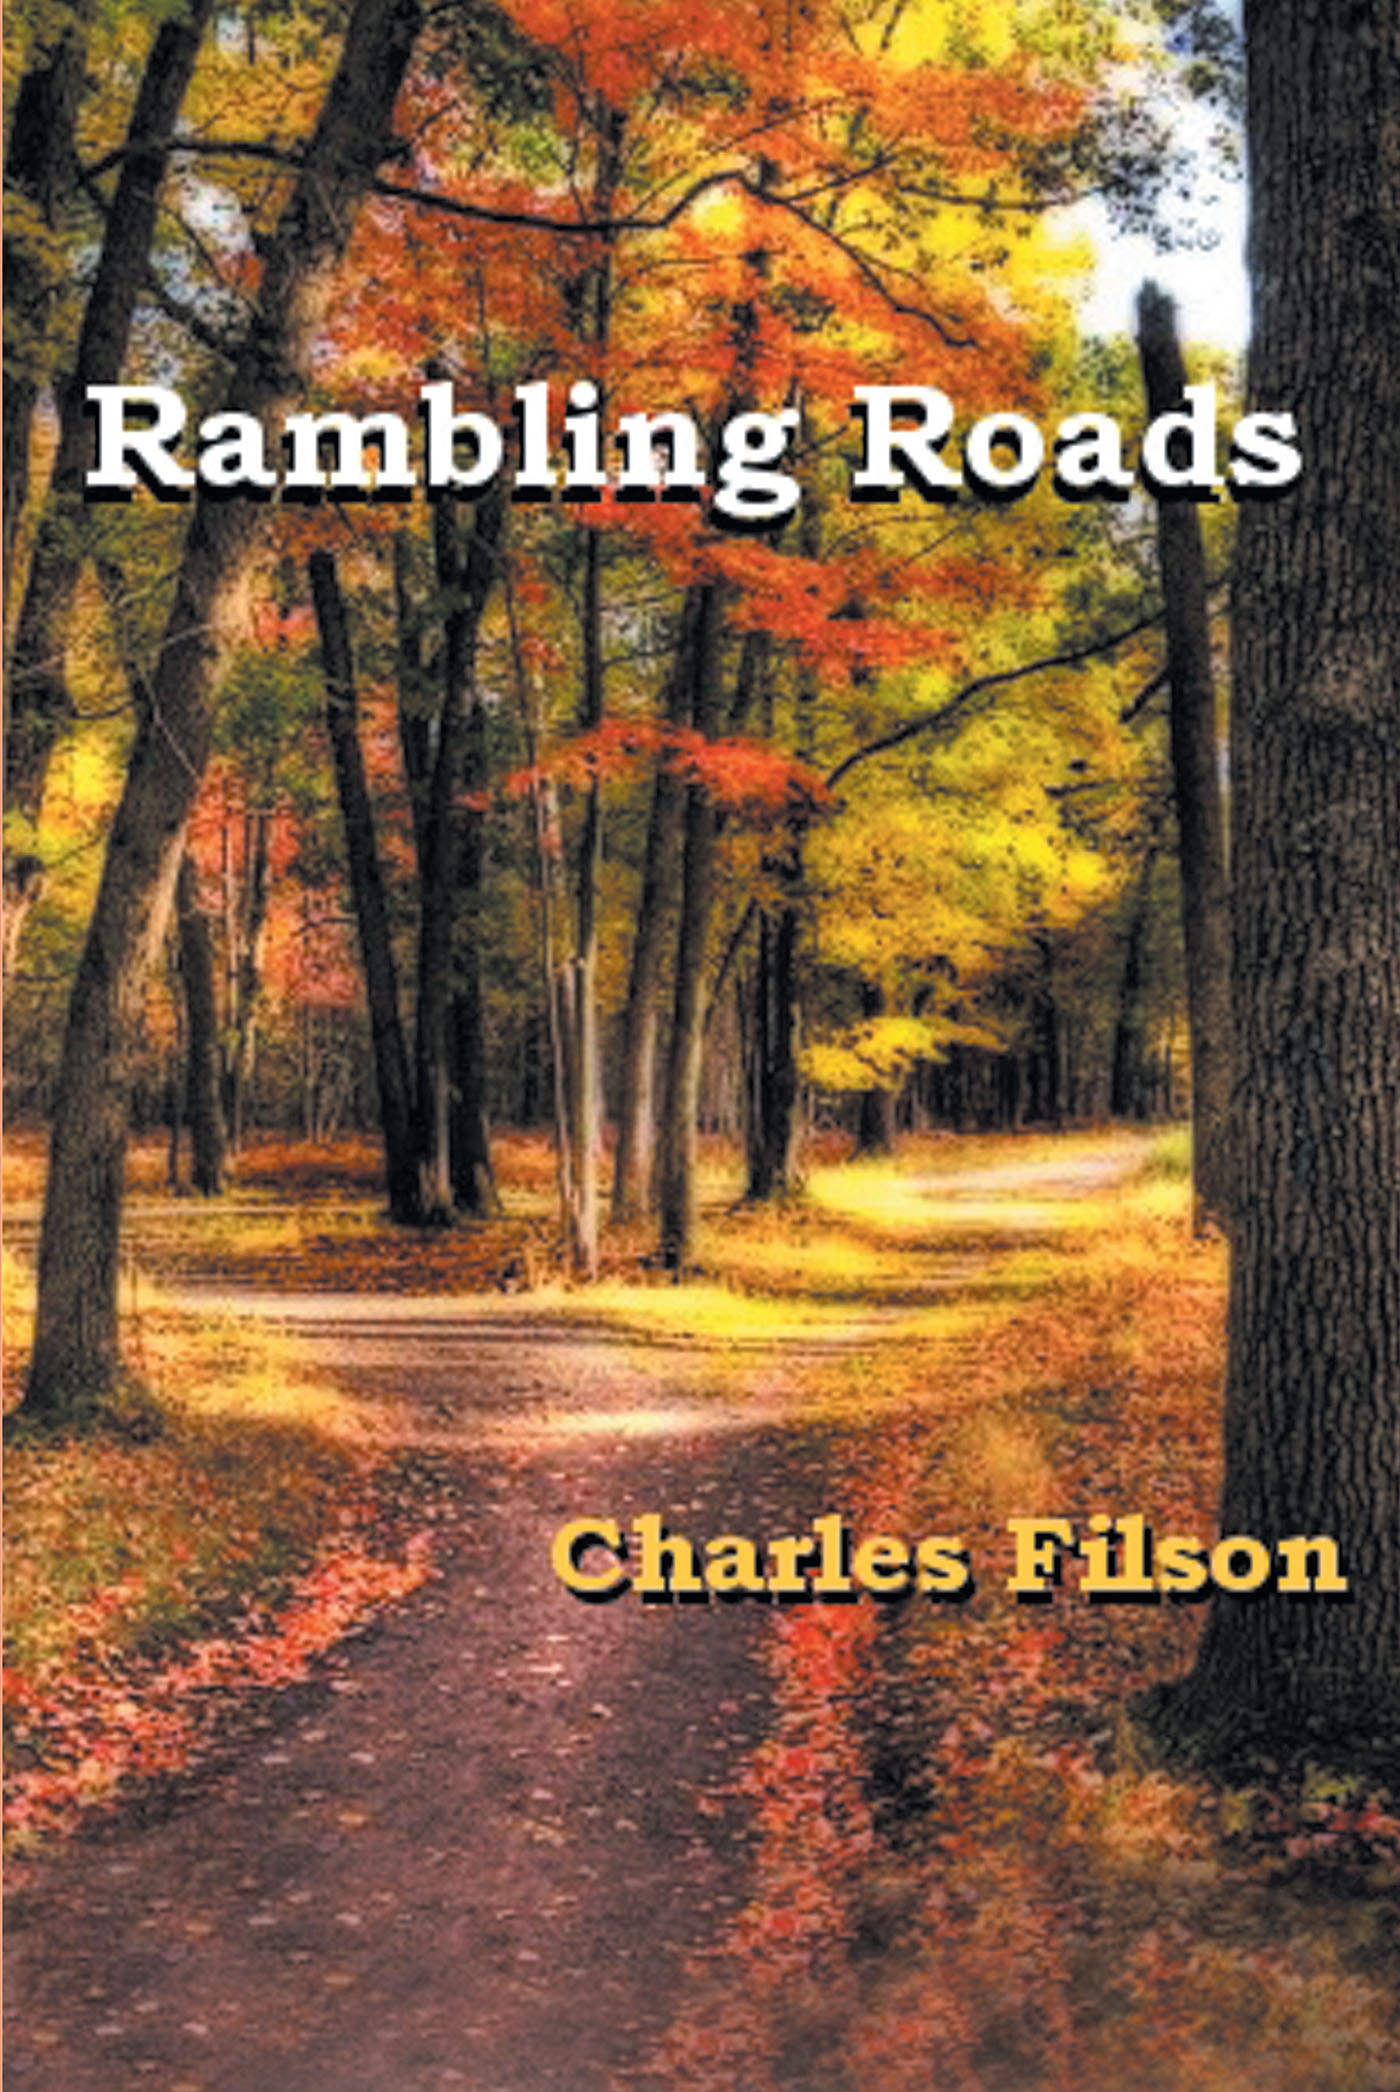 Charles Filson’s Newly Released "Rambling Roads" is a Heartfelt Collection of Poetry Inspired by Life, Faith, and Appreciation for All of Life's Blessings